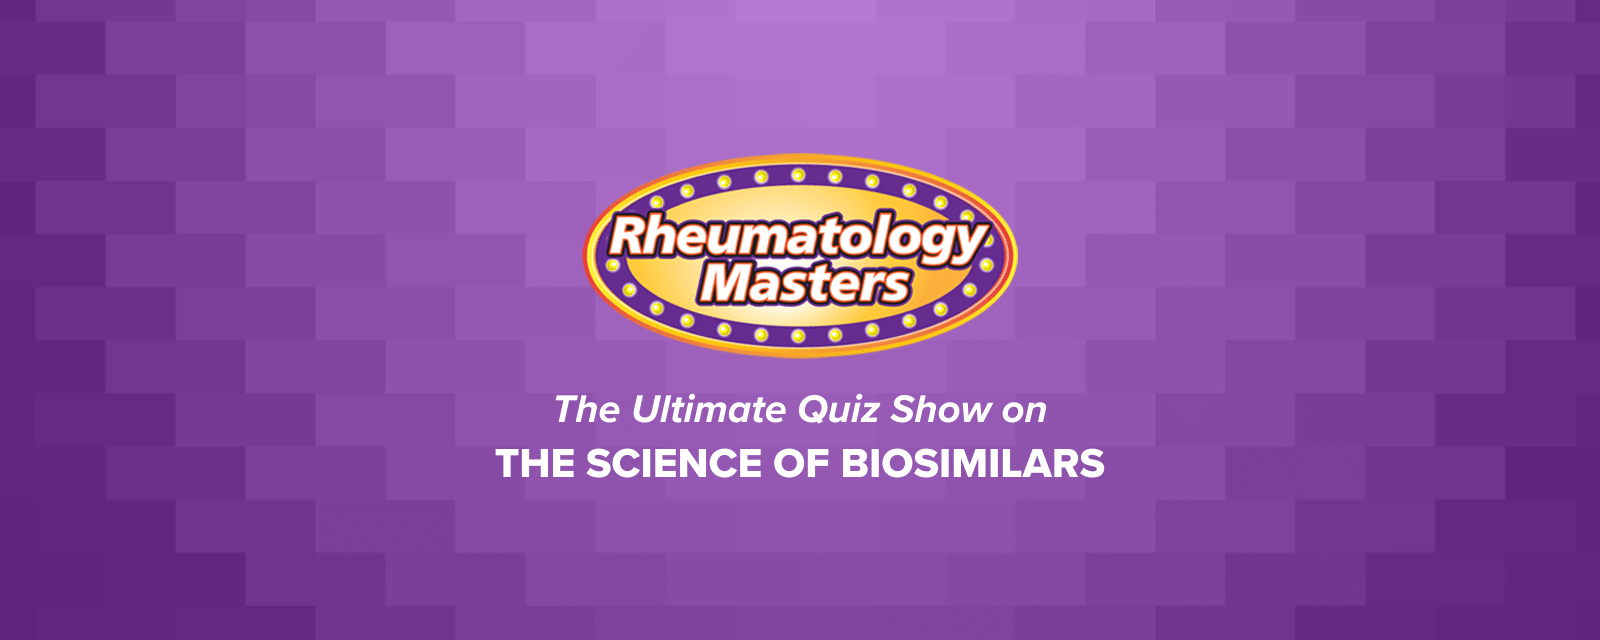 Rheumatology Masters: The Ultimate Quiz Show on the Science of Biosimilars